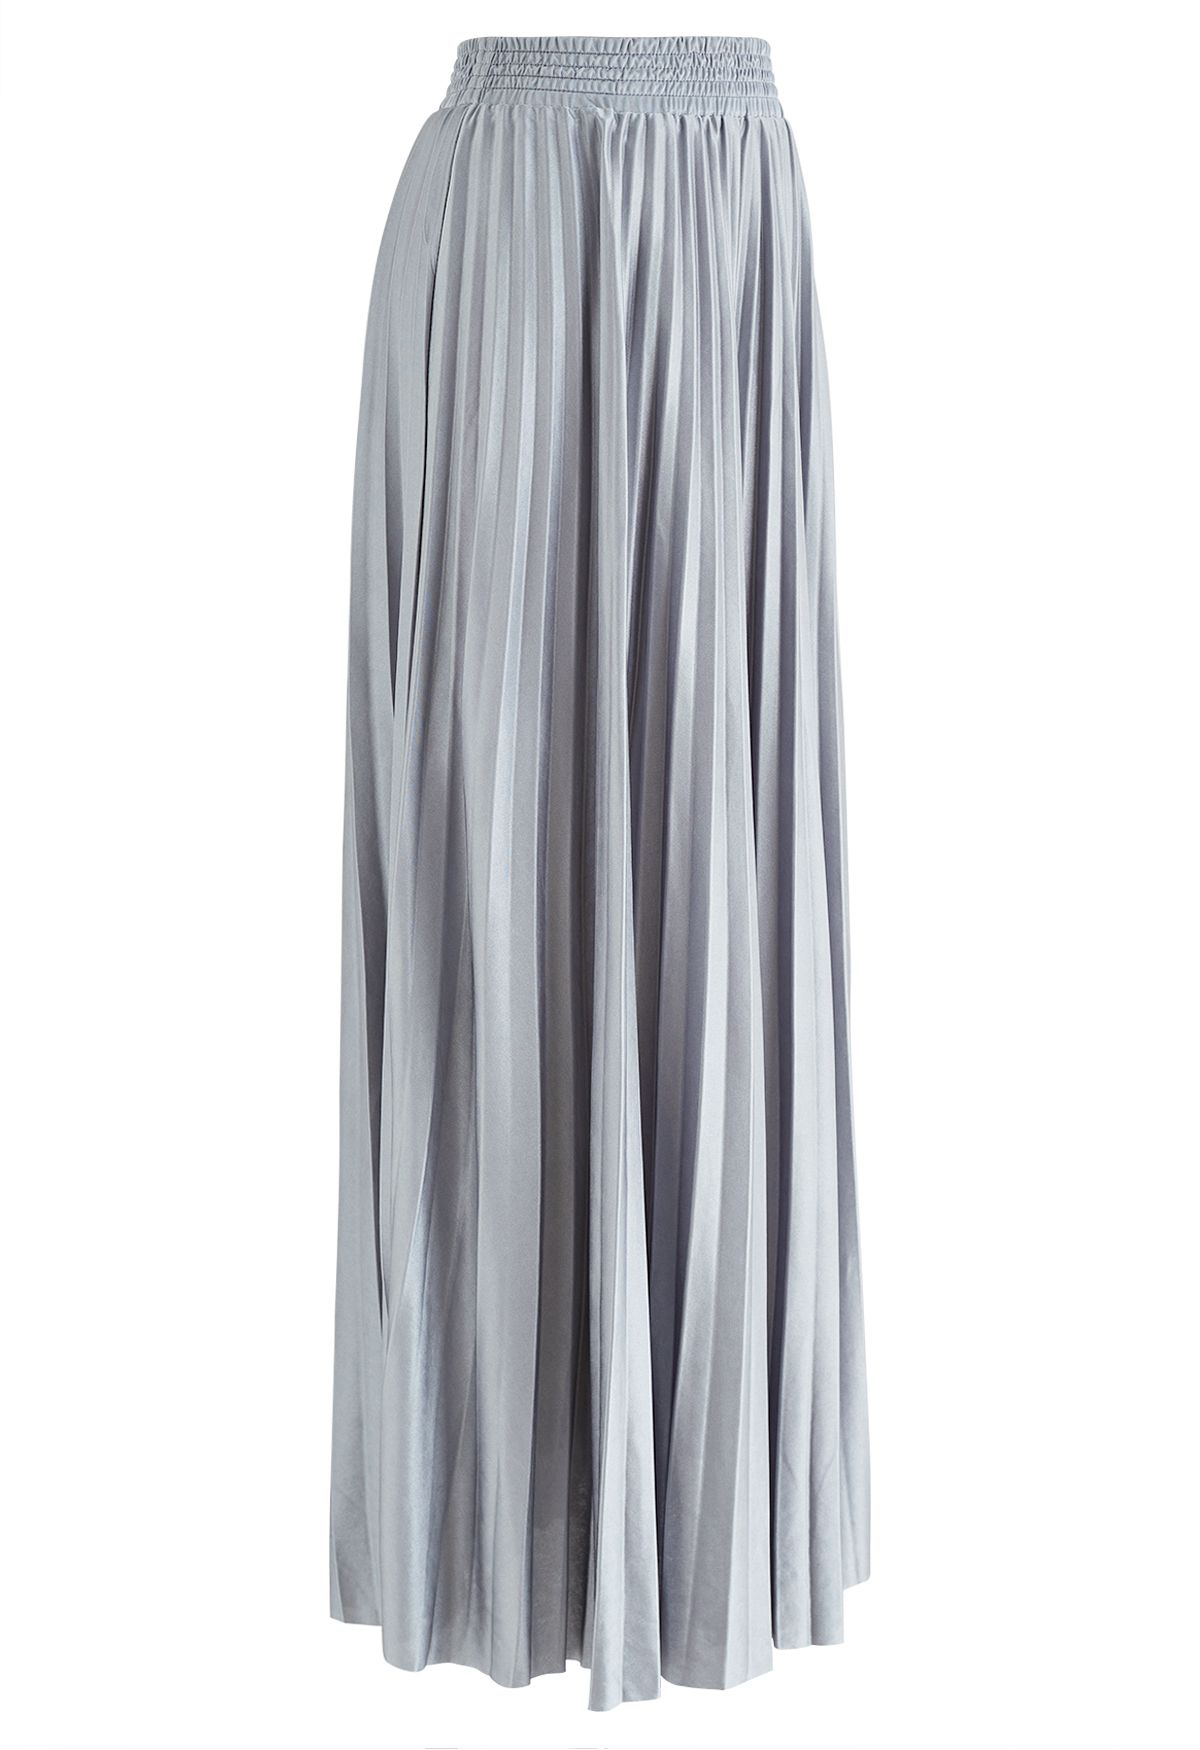 Glossy Pleated Maxi Skirt in Grey